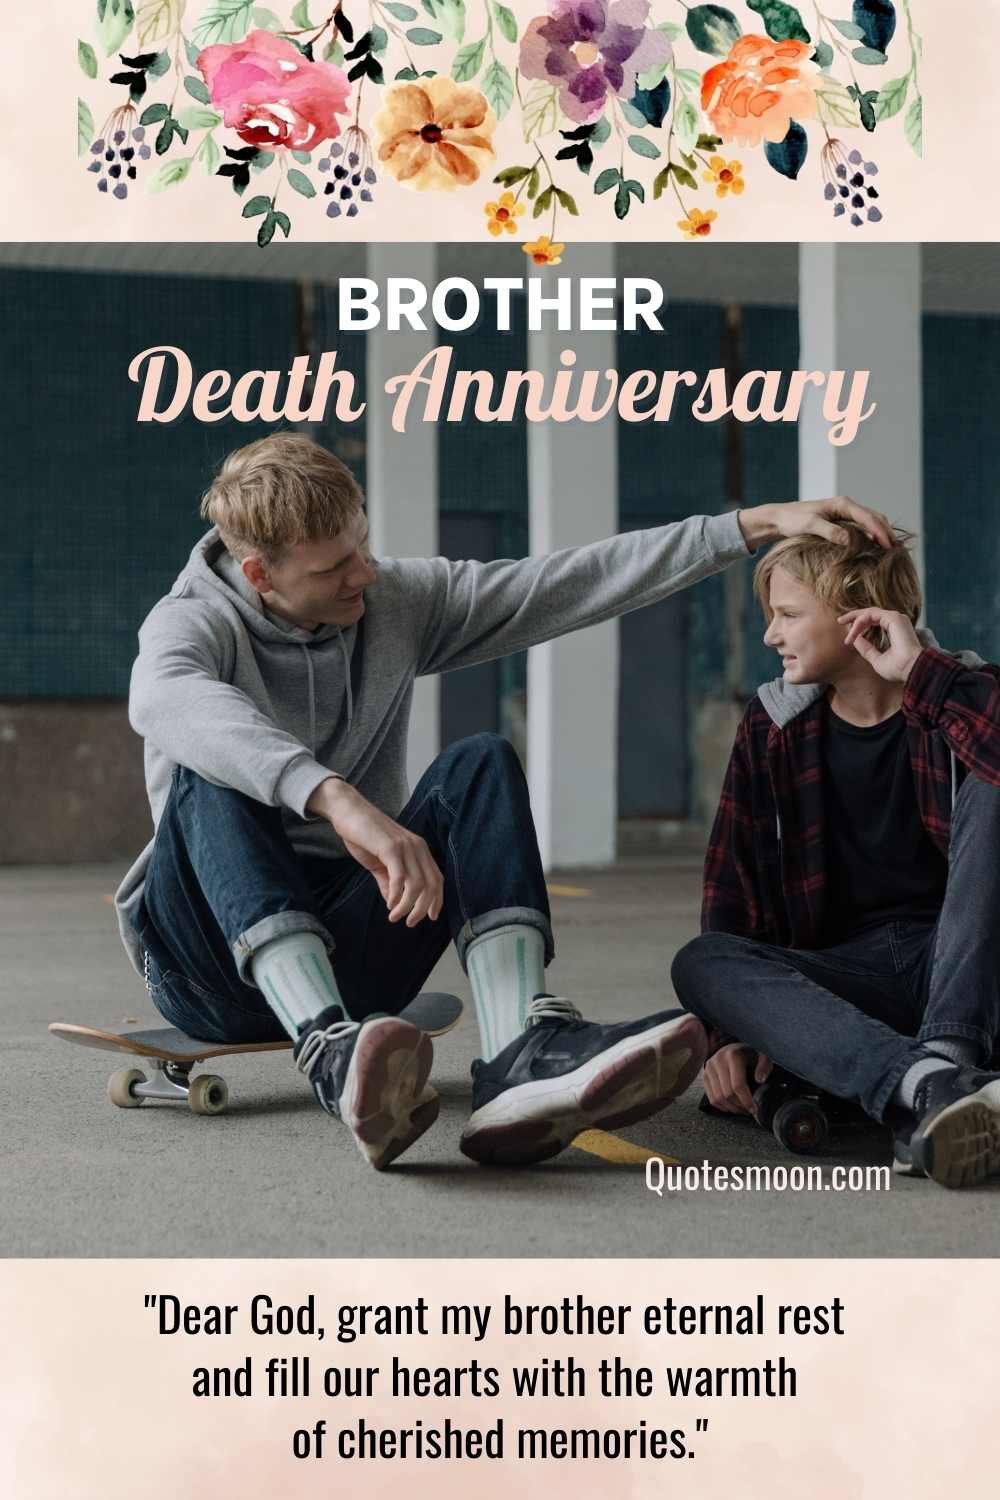 Quotes for 1 year Death Anniversary of brother with images